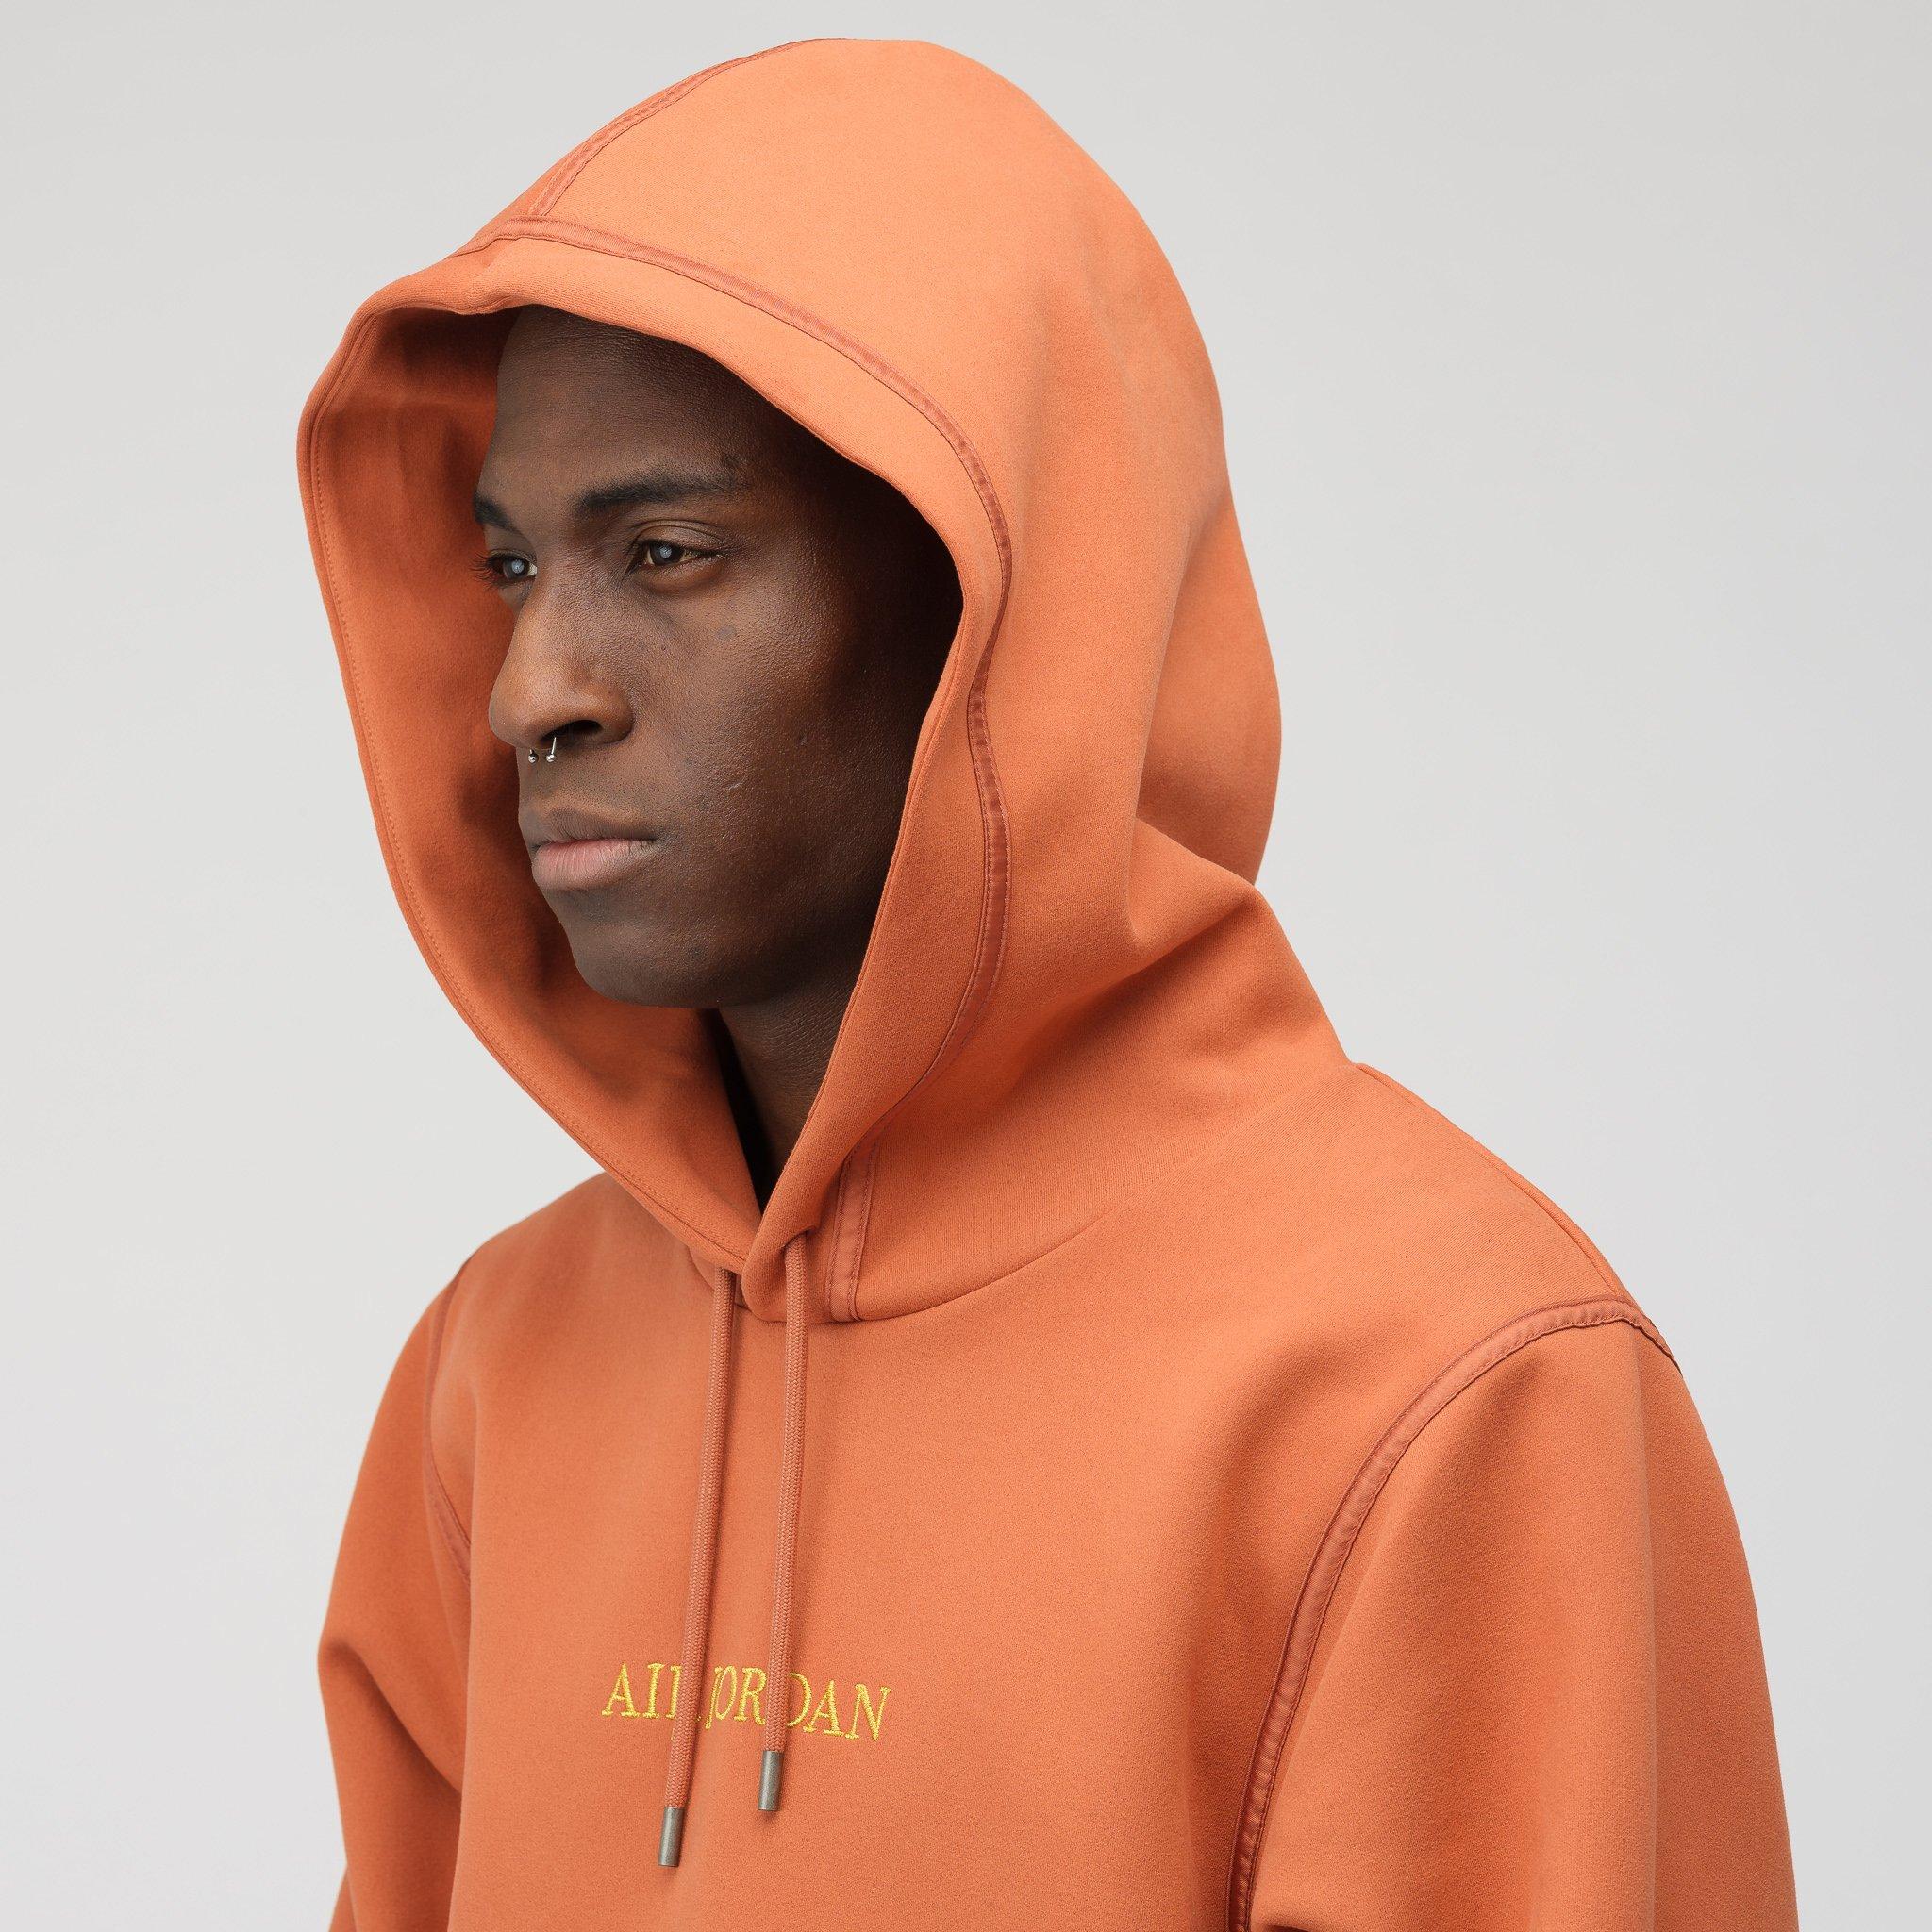 Nike Synthetic Remastered Hoodie in Dusty Peach (Orange) for Men - Lyst